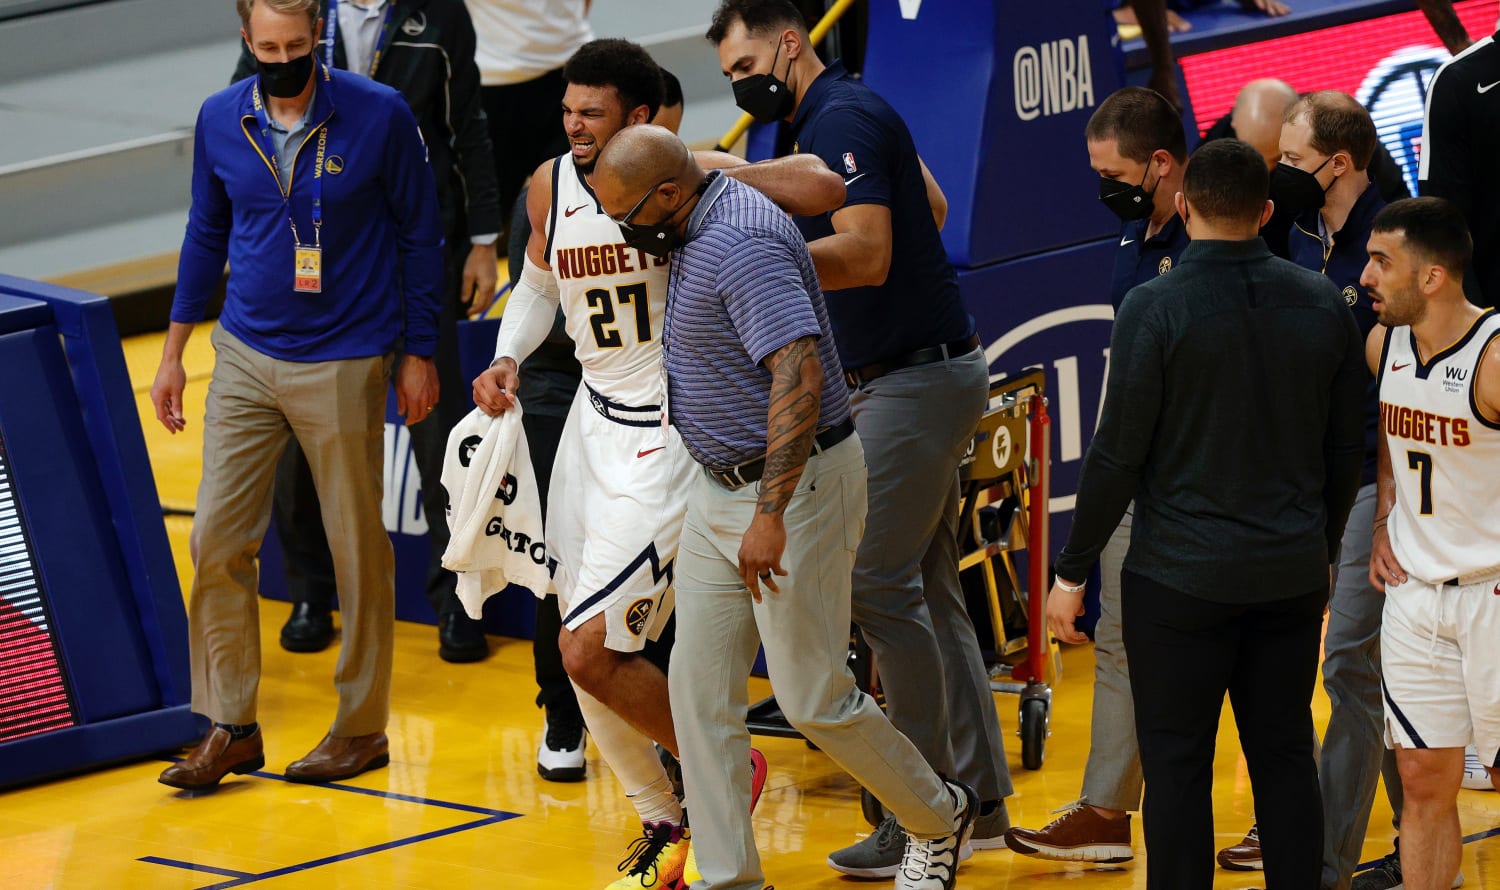 Nuggets star Jamal Murray being helped off the court